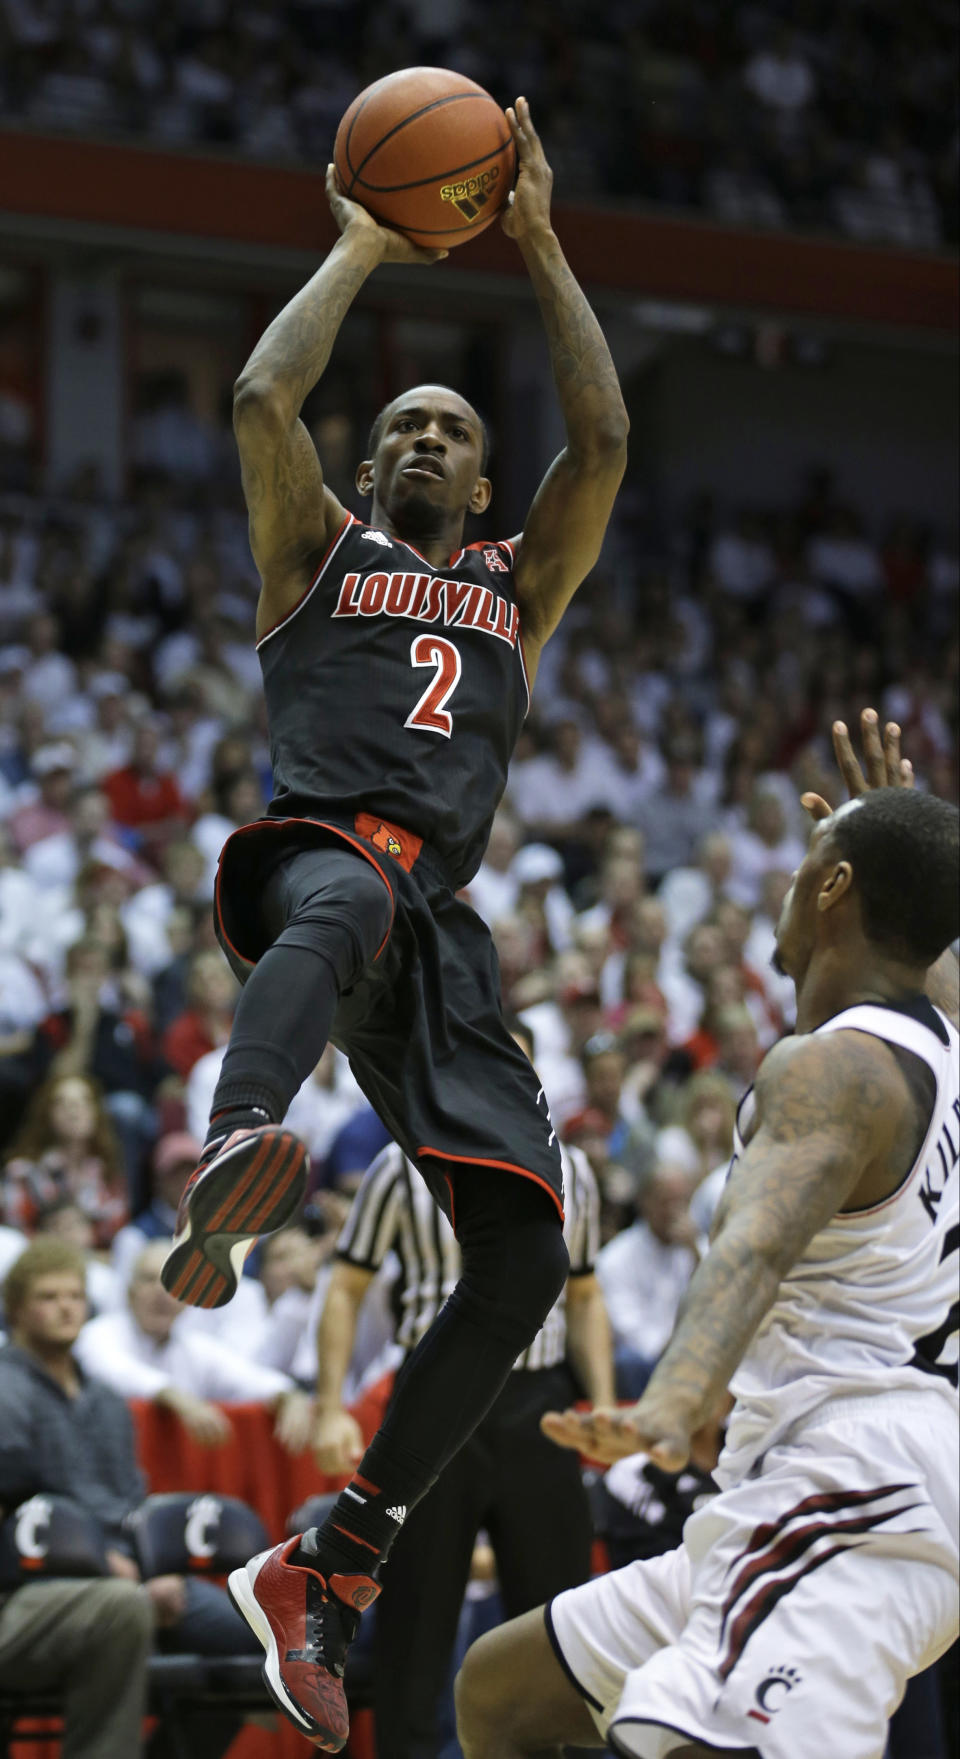 FILE - In this Feb. 22, 2014 file photo, Louisville guard Russ Smith (2) shoots over Cincinnati guard Sean Kilpatrick in the second half of an NCAA college basketball game in Cincinnati. Smith was selected to The Associated Press All-America team, released Monday, March 31, 2014. (AP Photo/Al Behrman, File)